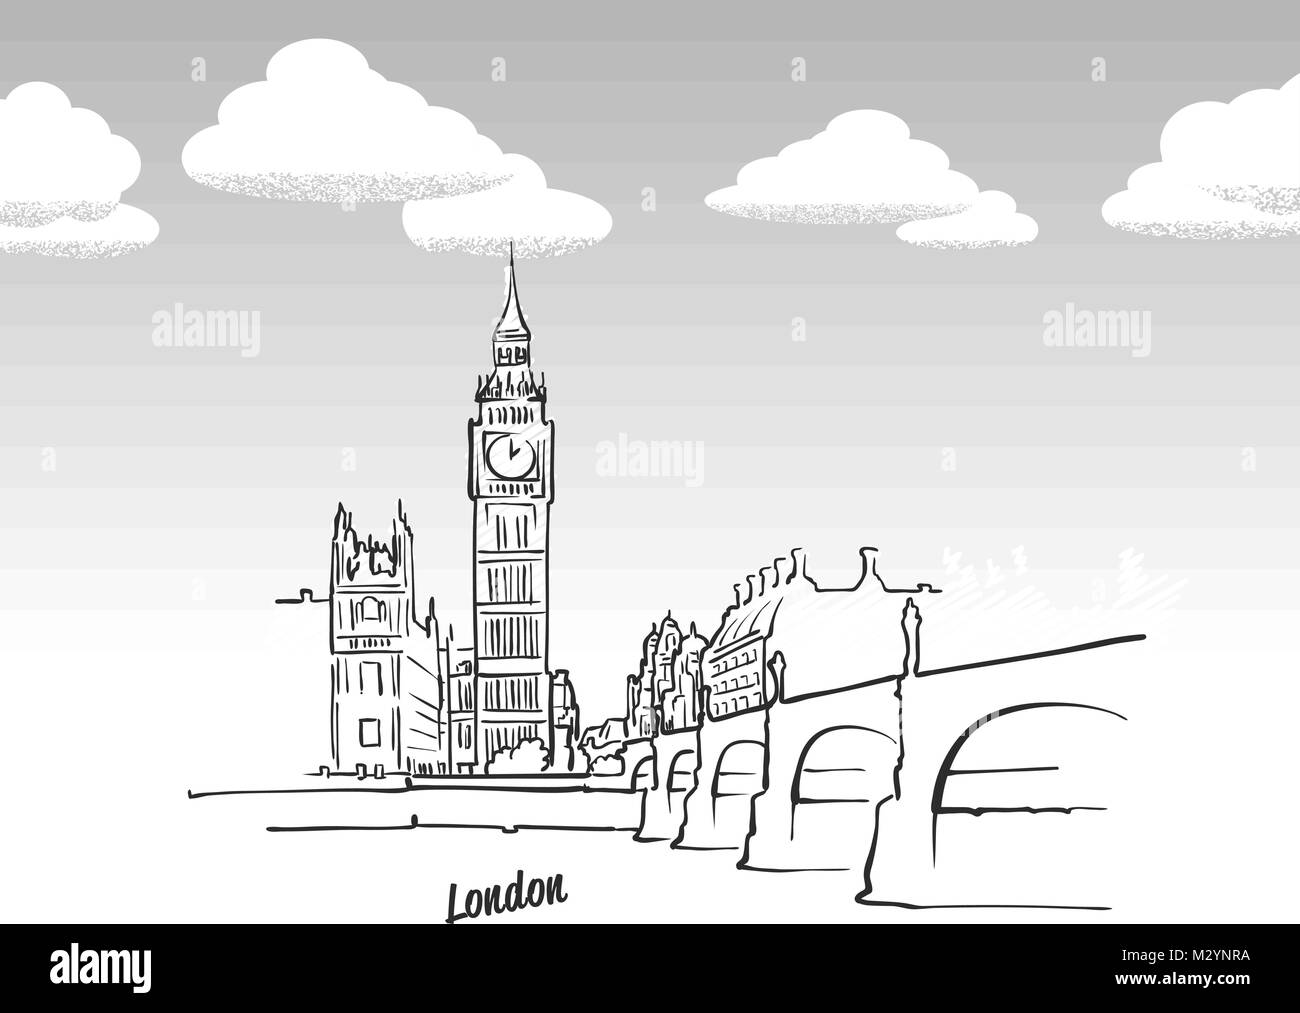 London, United Kingdom famous landmark sketch. Lineart drawing by hand. Greeting card icon with title, vector illustration Stock Vector